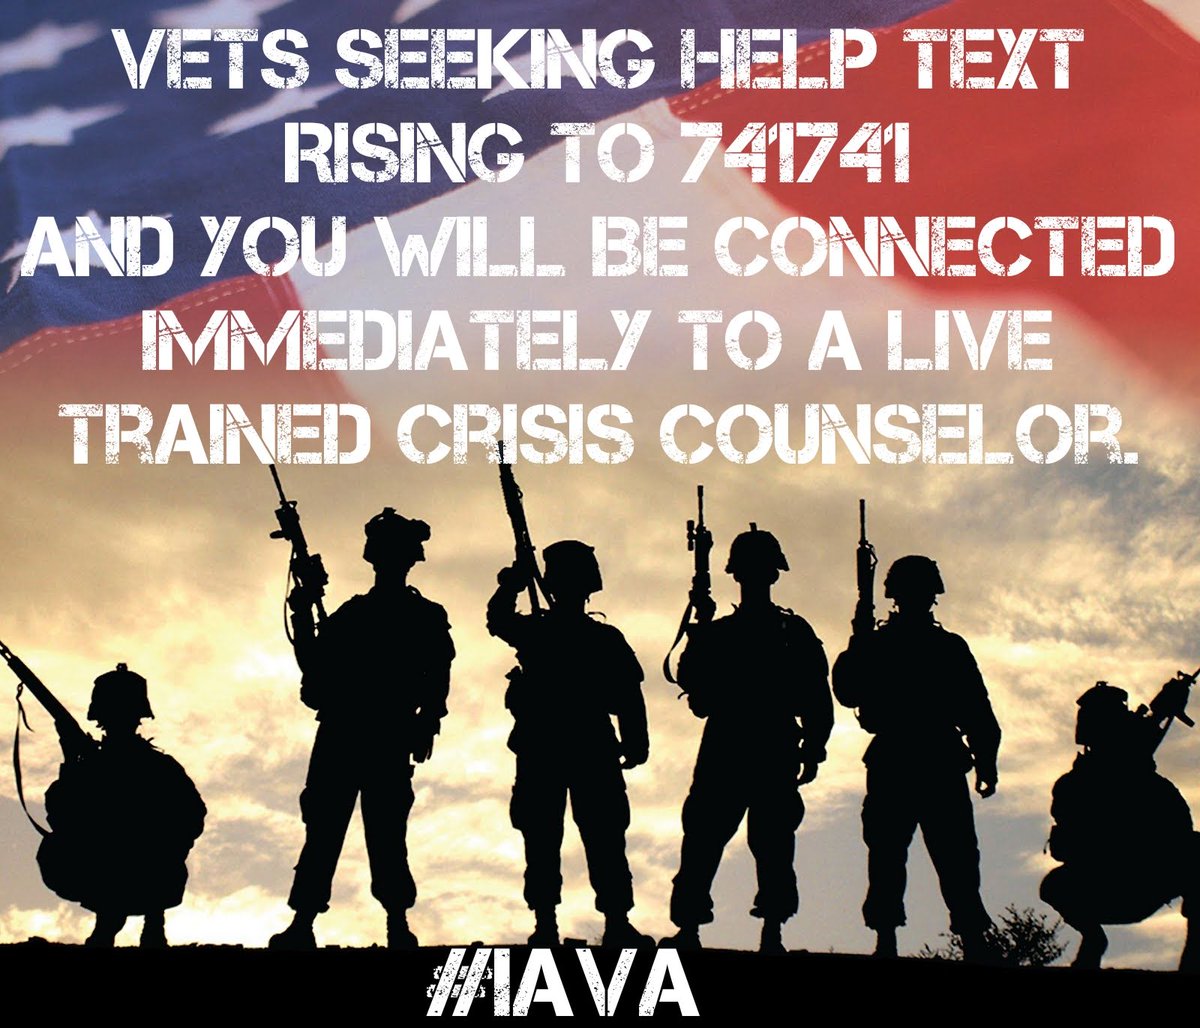 3/ Vets seeking help TextRISING to 741741and you will be connectedimmediately to a livetrained Crisis Counselor. #IAVA